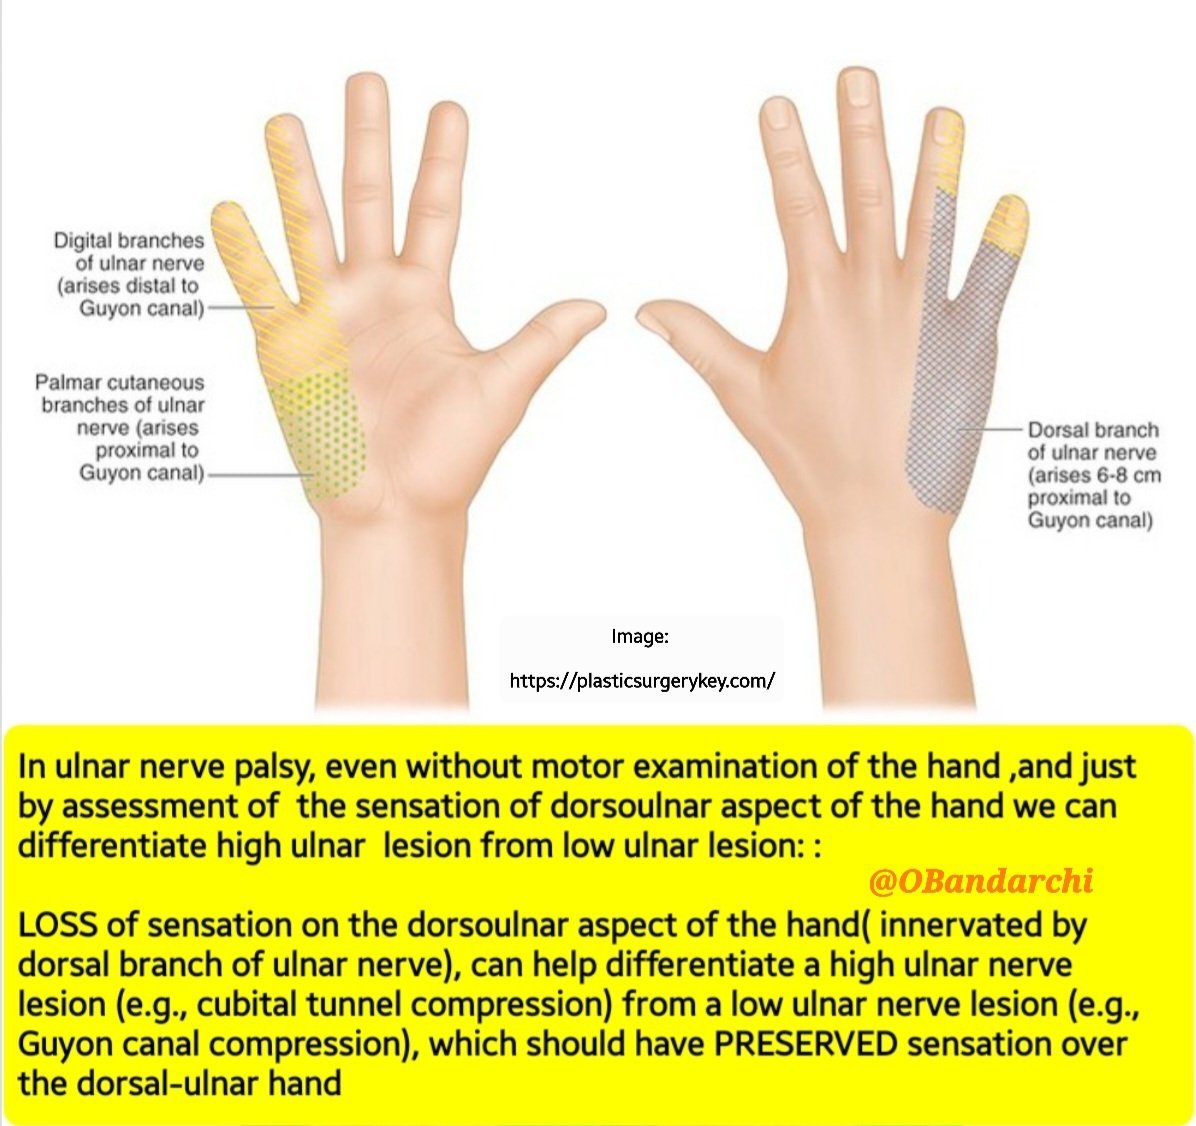 Dr. OMID BANDARCHI on X: Even without motor examination of hand